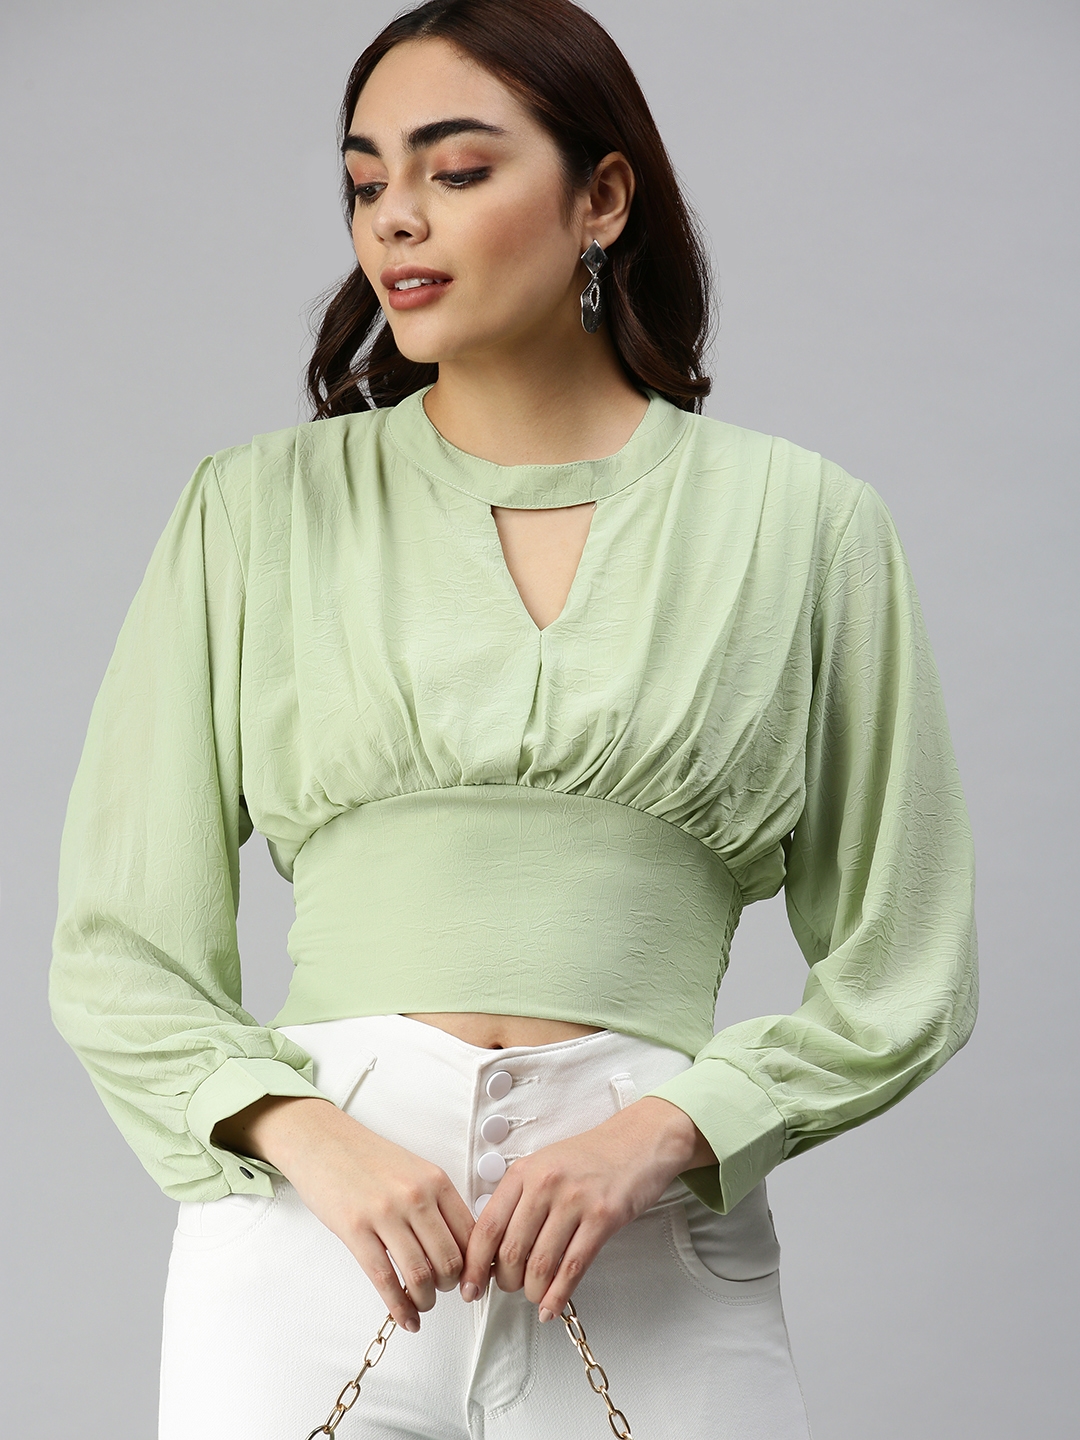 Showoff | SHOWOFF Women's Long Sleeves Keyhole Neck Green Solid Top